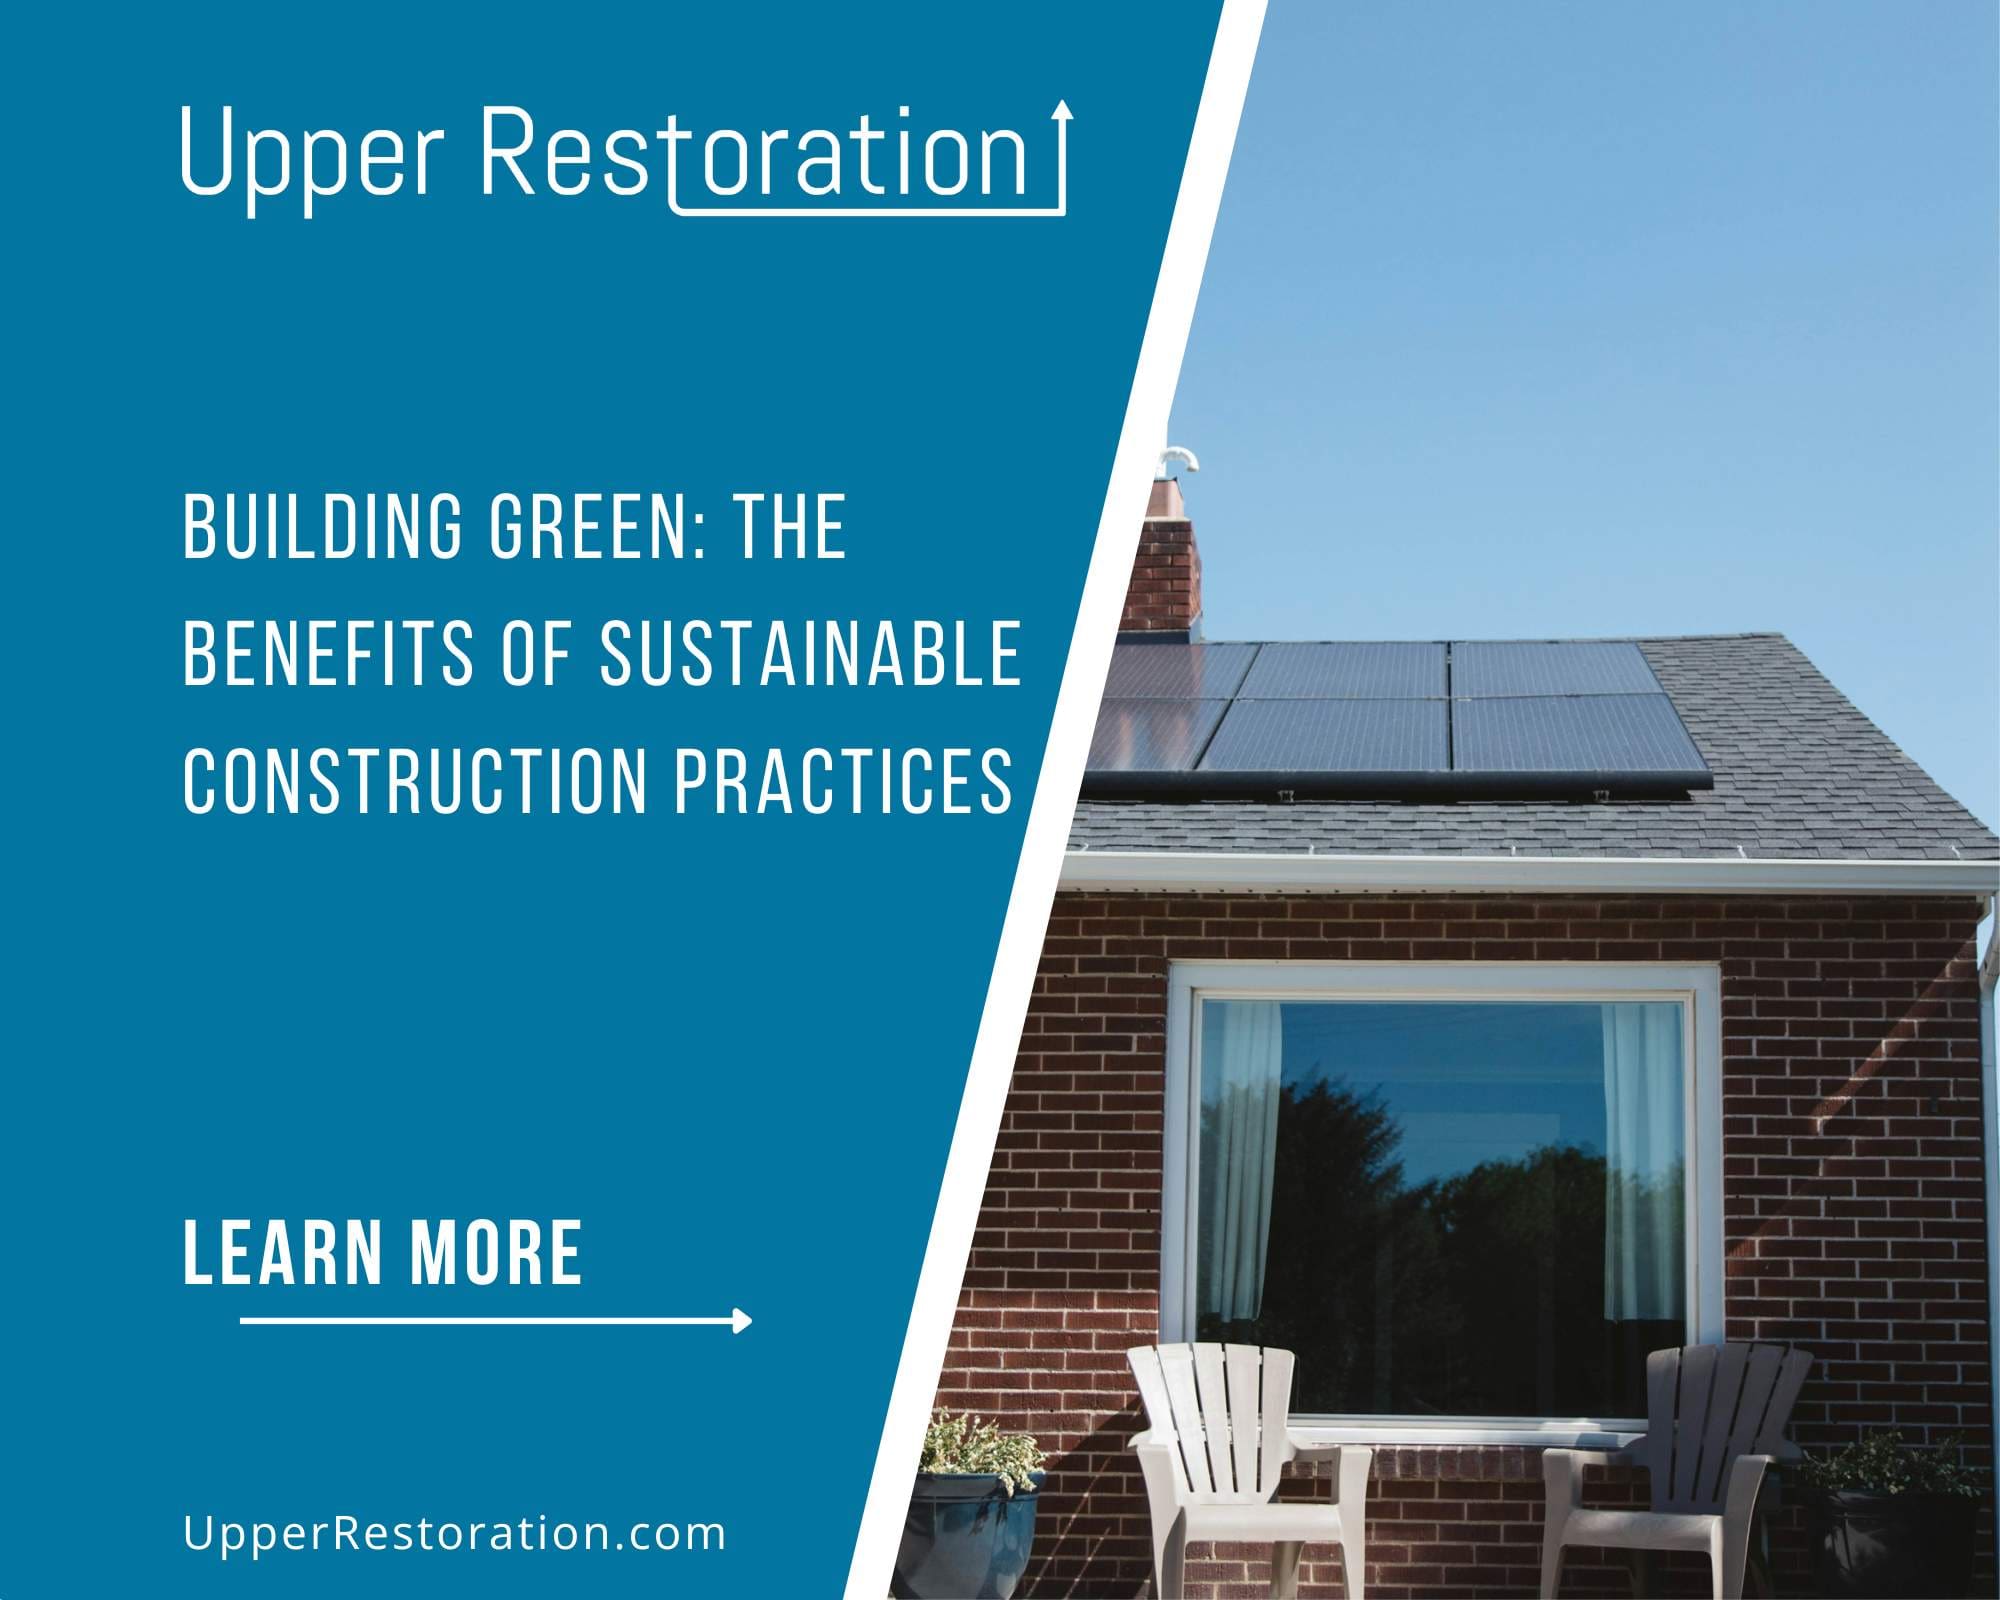 Building Green: The Benefits of Sustainable Construction Practices